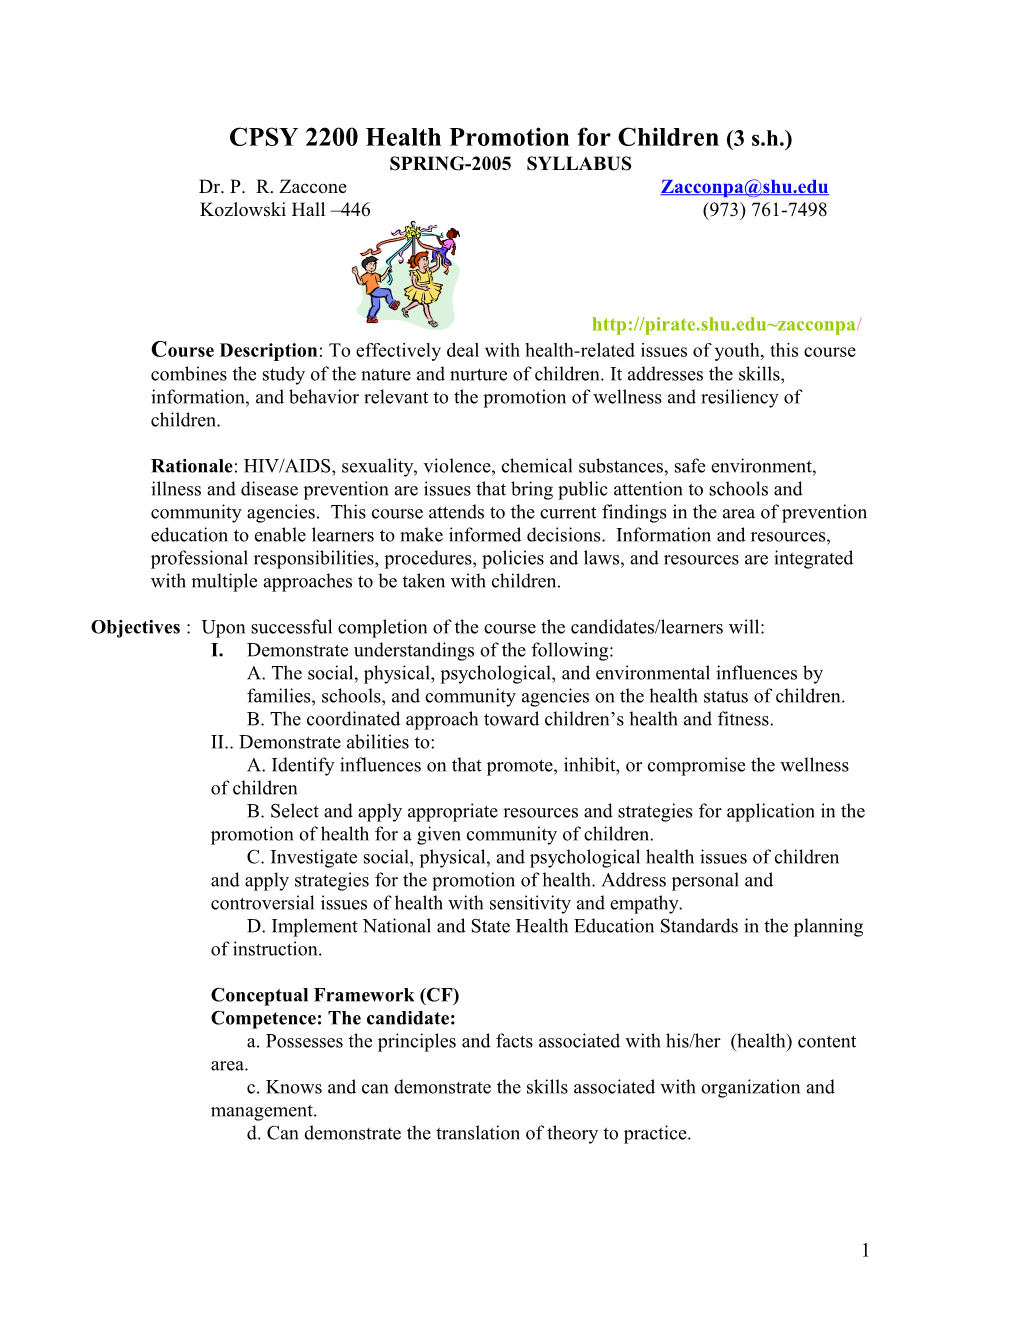 Proposal CPSY Health Promotion for Children (3 S